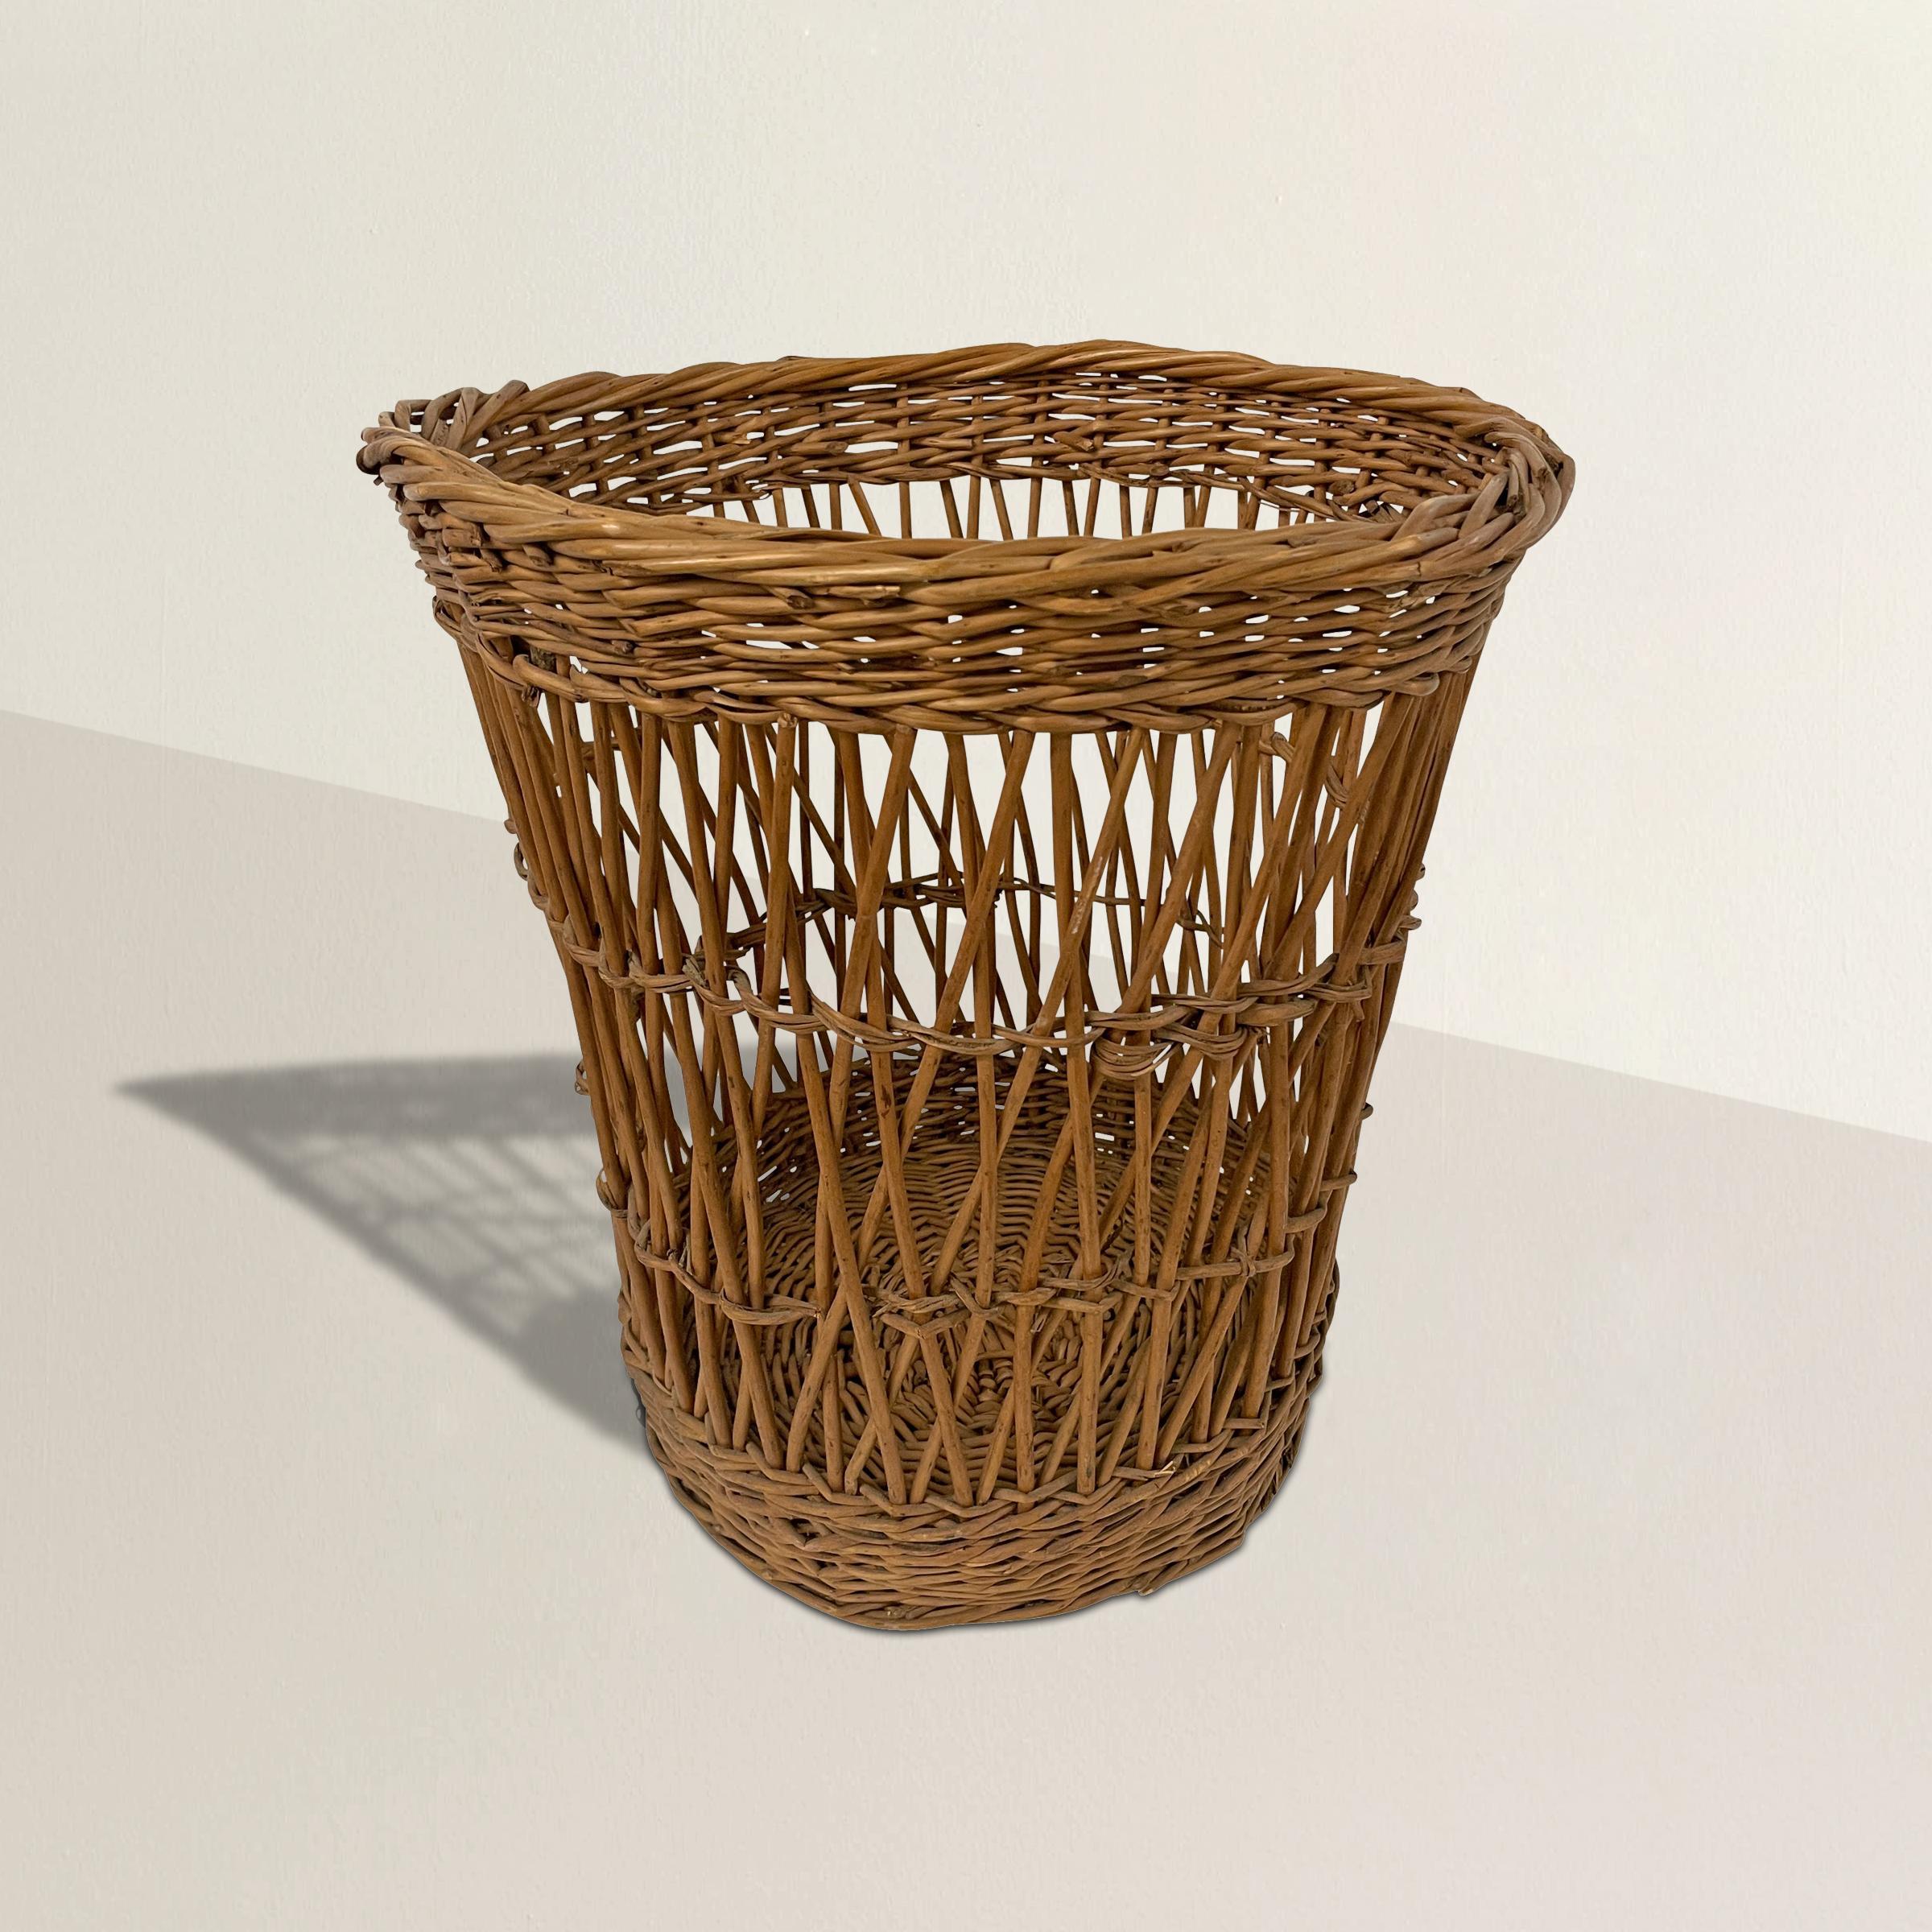 A wonderful 20th century French woven wicker basket originally used in a bakery to hold baguettes or other loaves of bread, but if you don't have a bakery in your house, it's perfect for use as a wastepaper basket in your office or powder room.